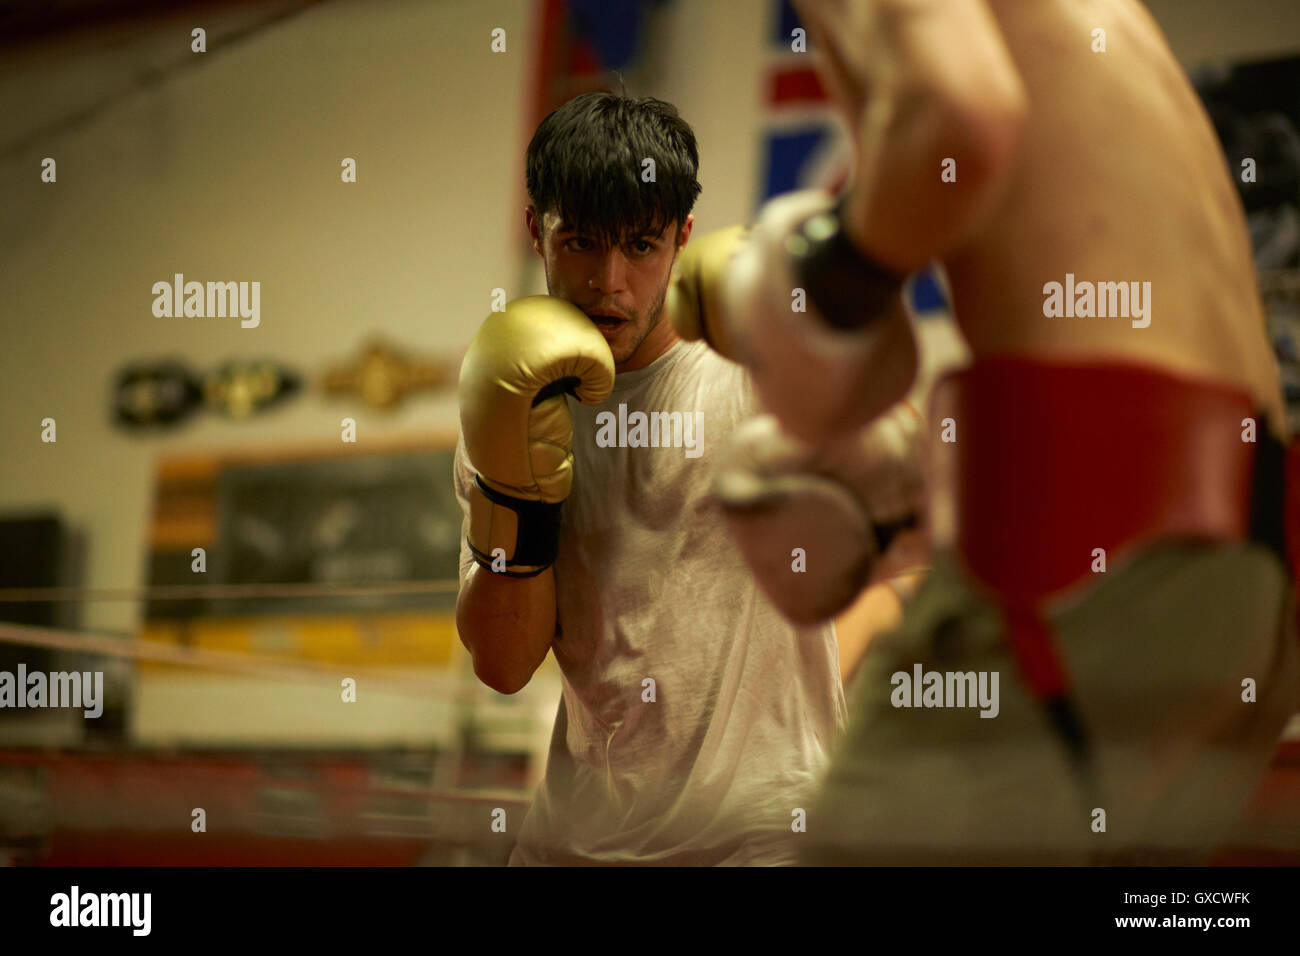 Two boxers sparring in boxing ring Stock Photo